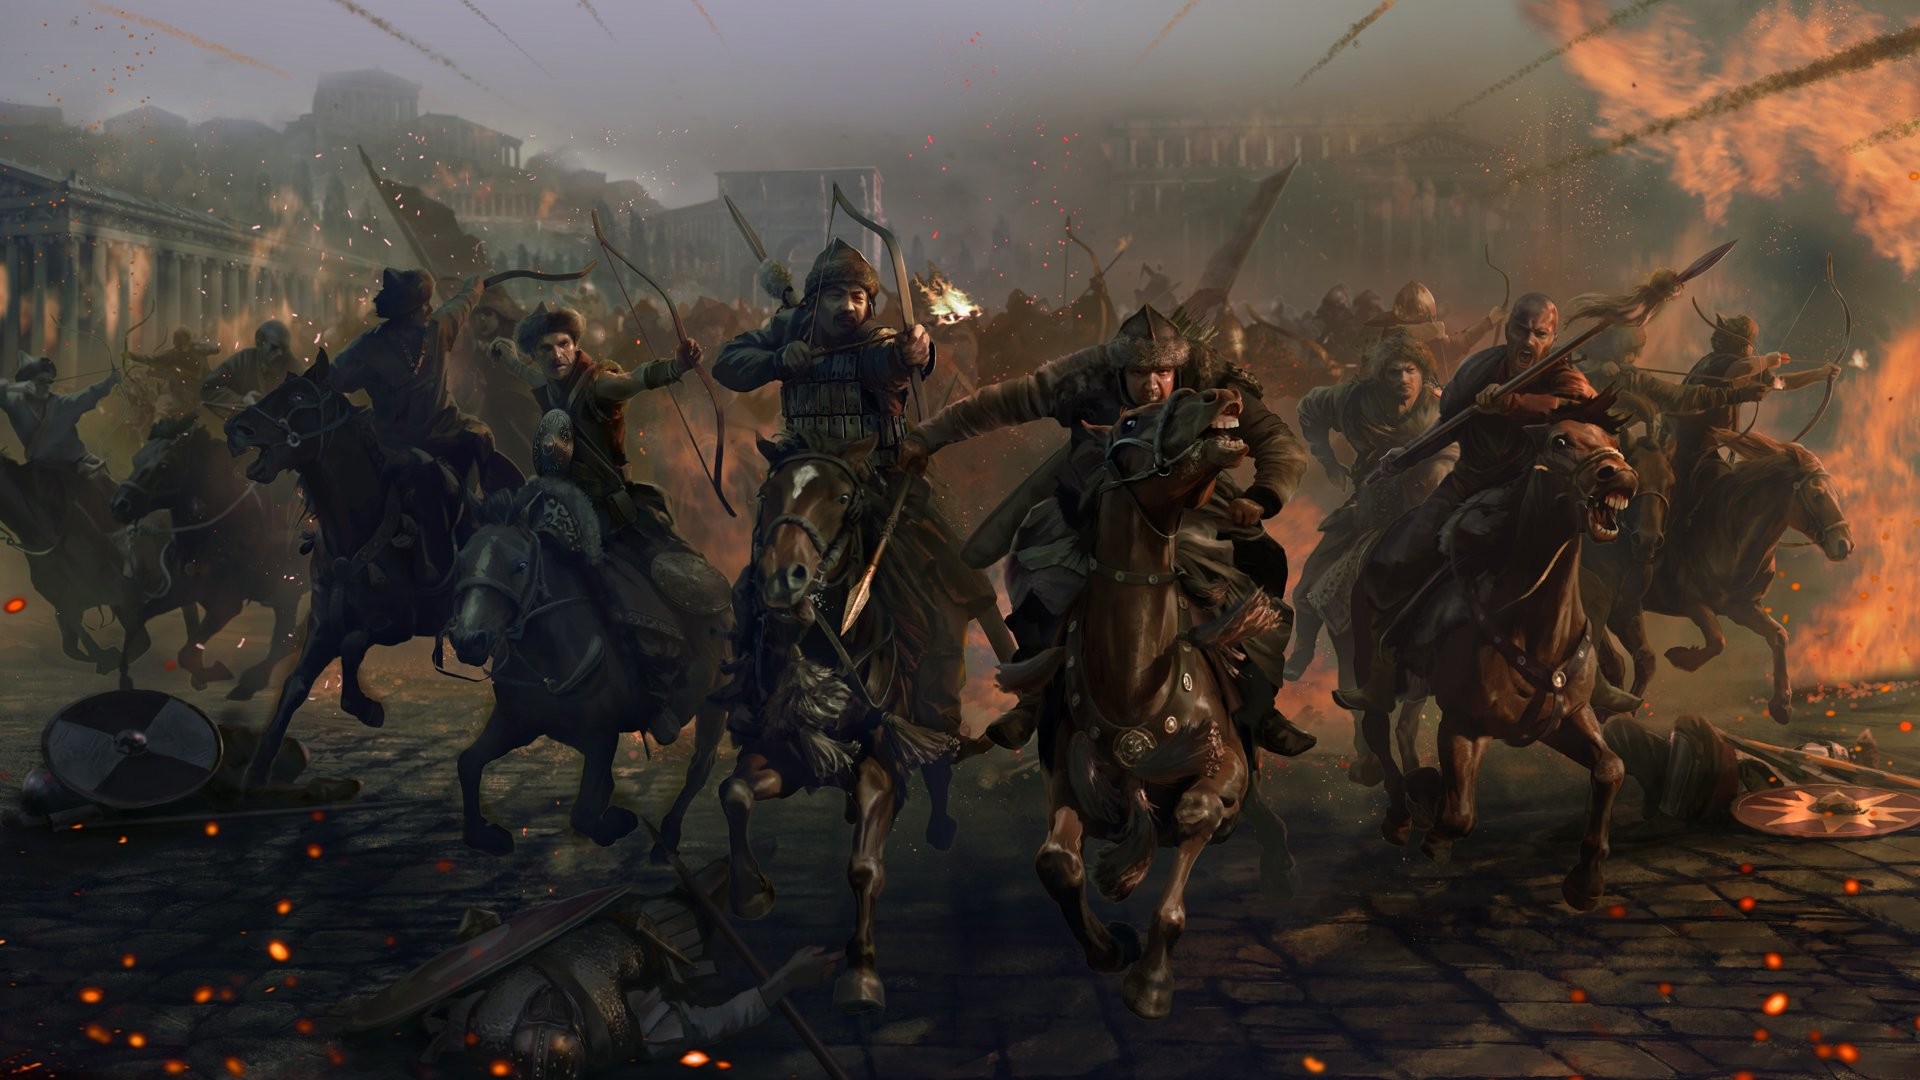 1920x1080 Total War Warhammer HD Wallpapers and Backgrounds | Images Wallpapers |  Pinterest | Total war and Wallpaper